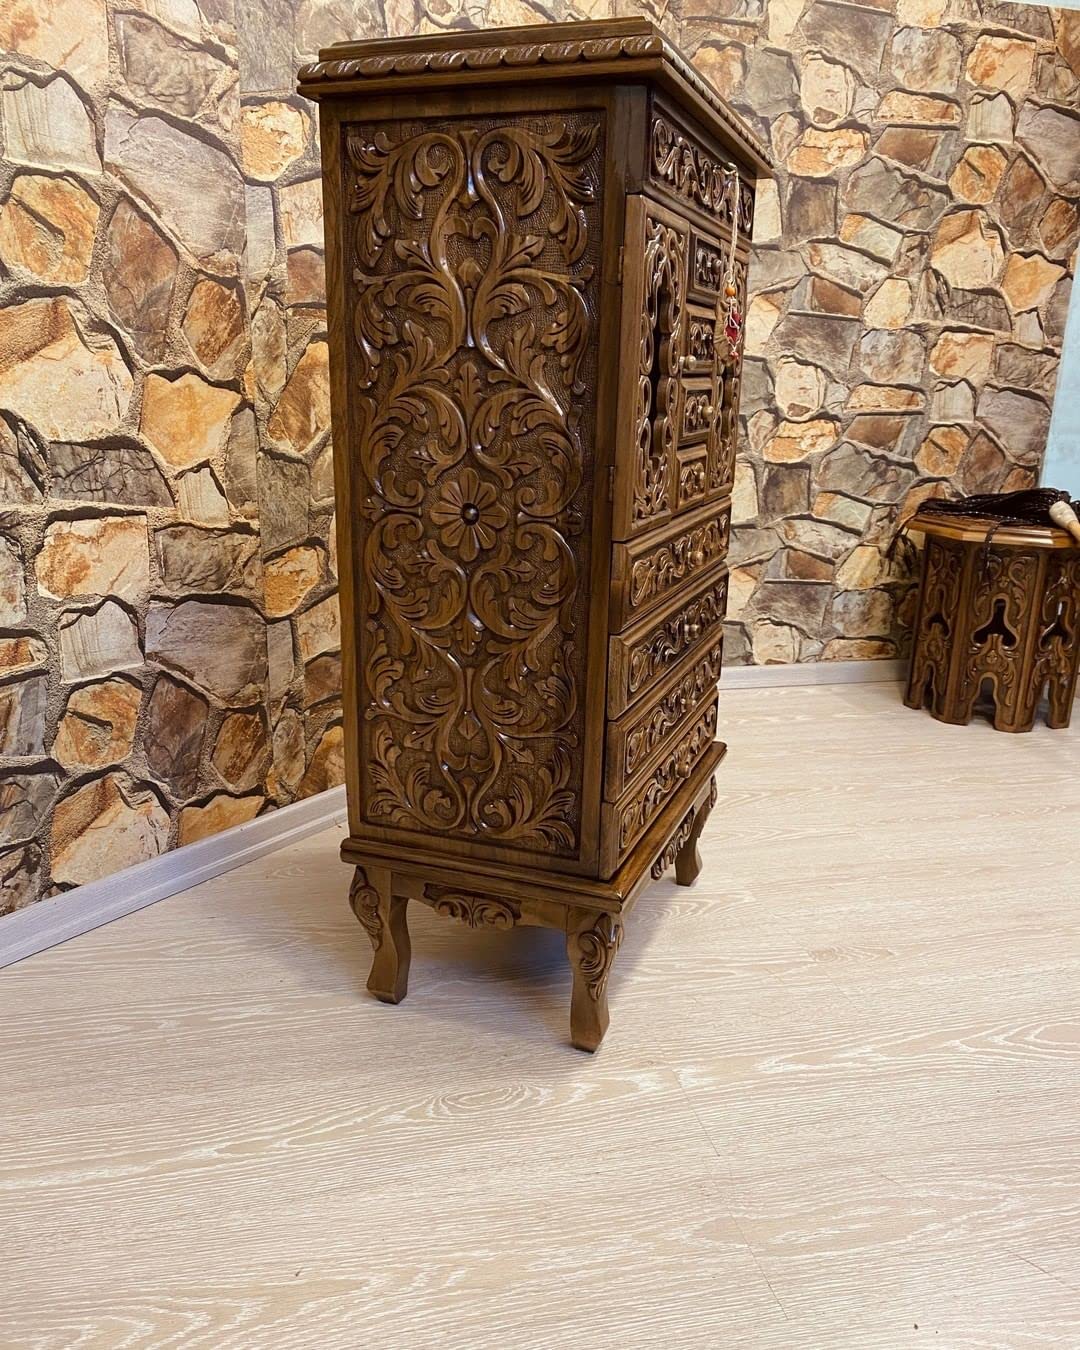 Antique Walnut Carved Side Table with Drawers and Doors